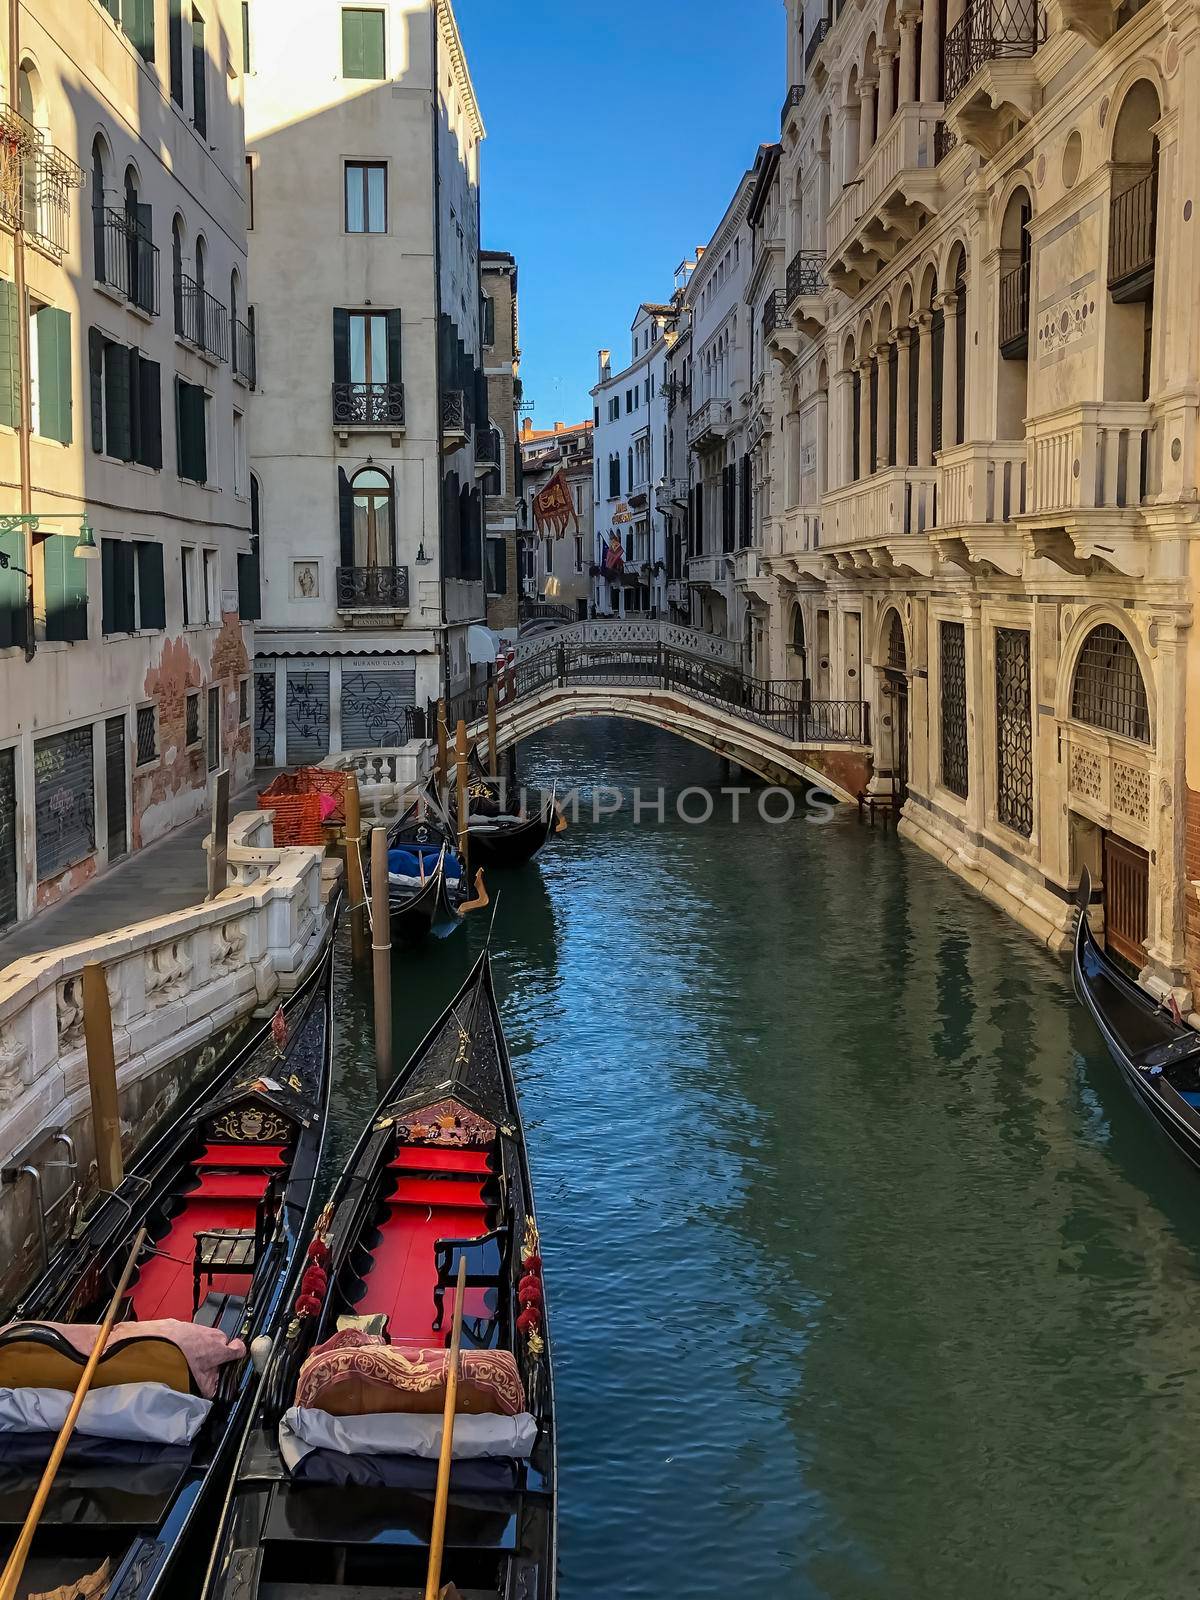 venetian canal and old brick houses in Venice, Italy by kaliaevaen